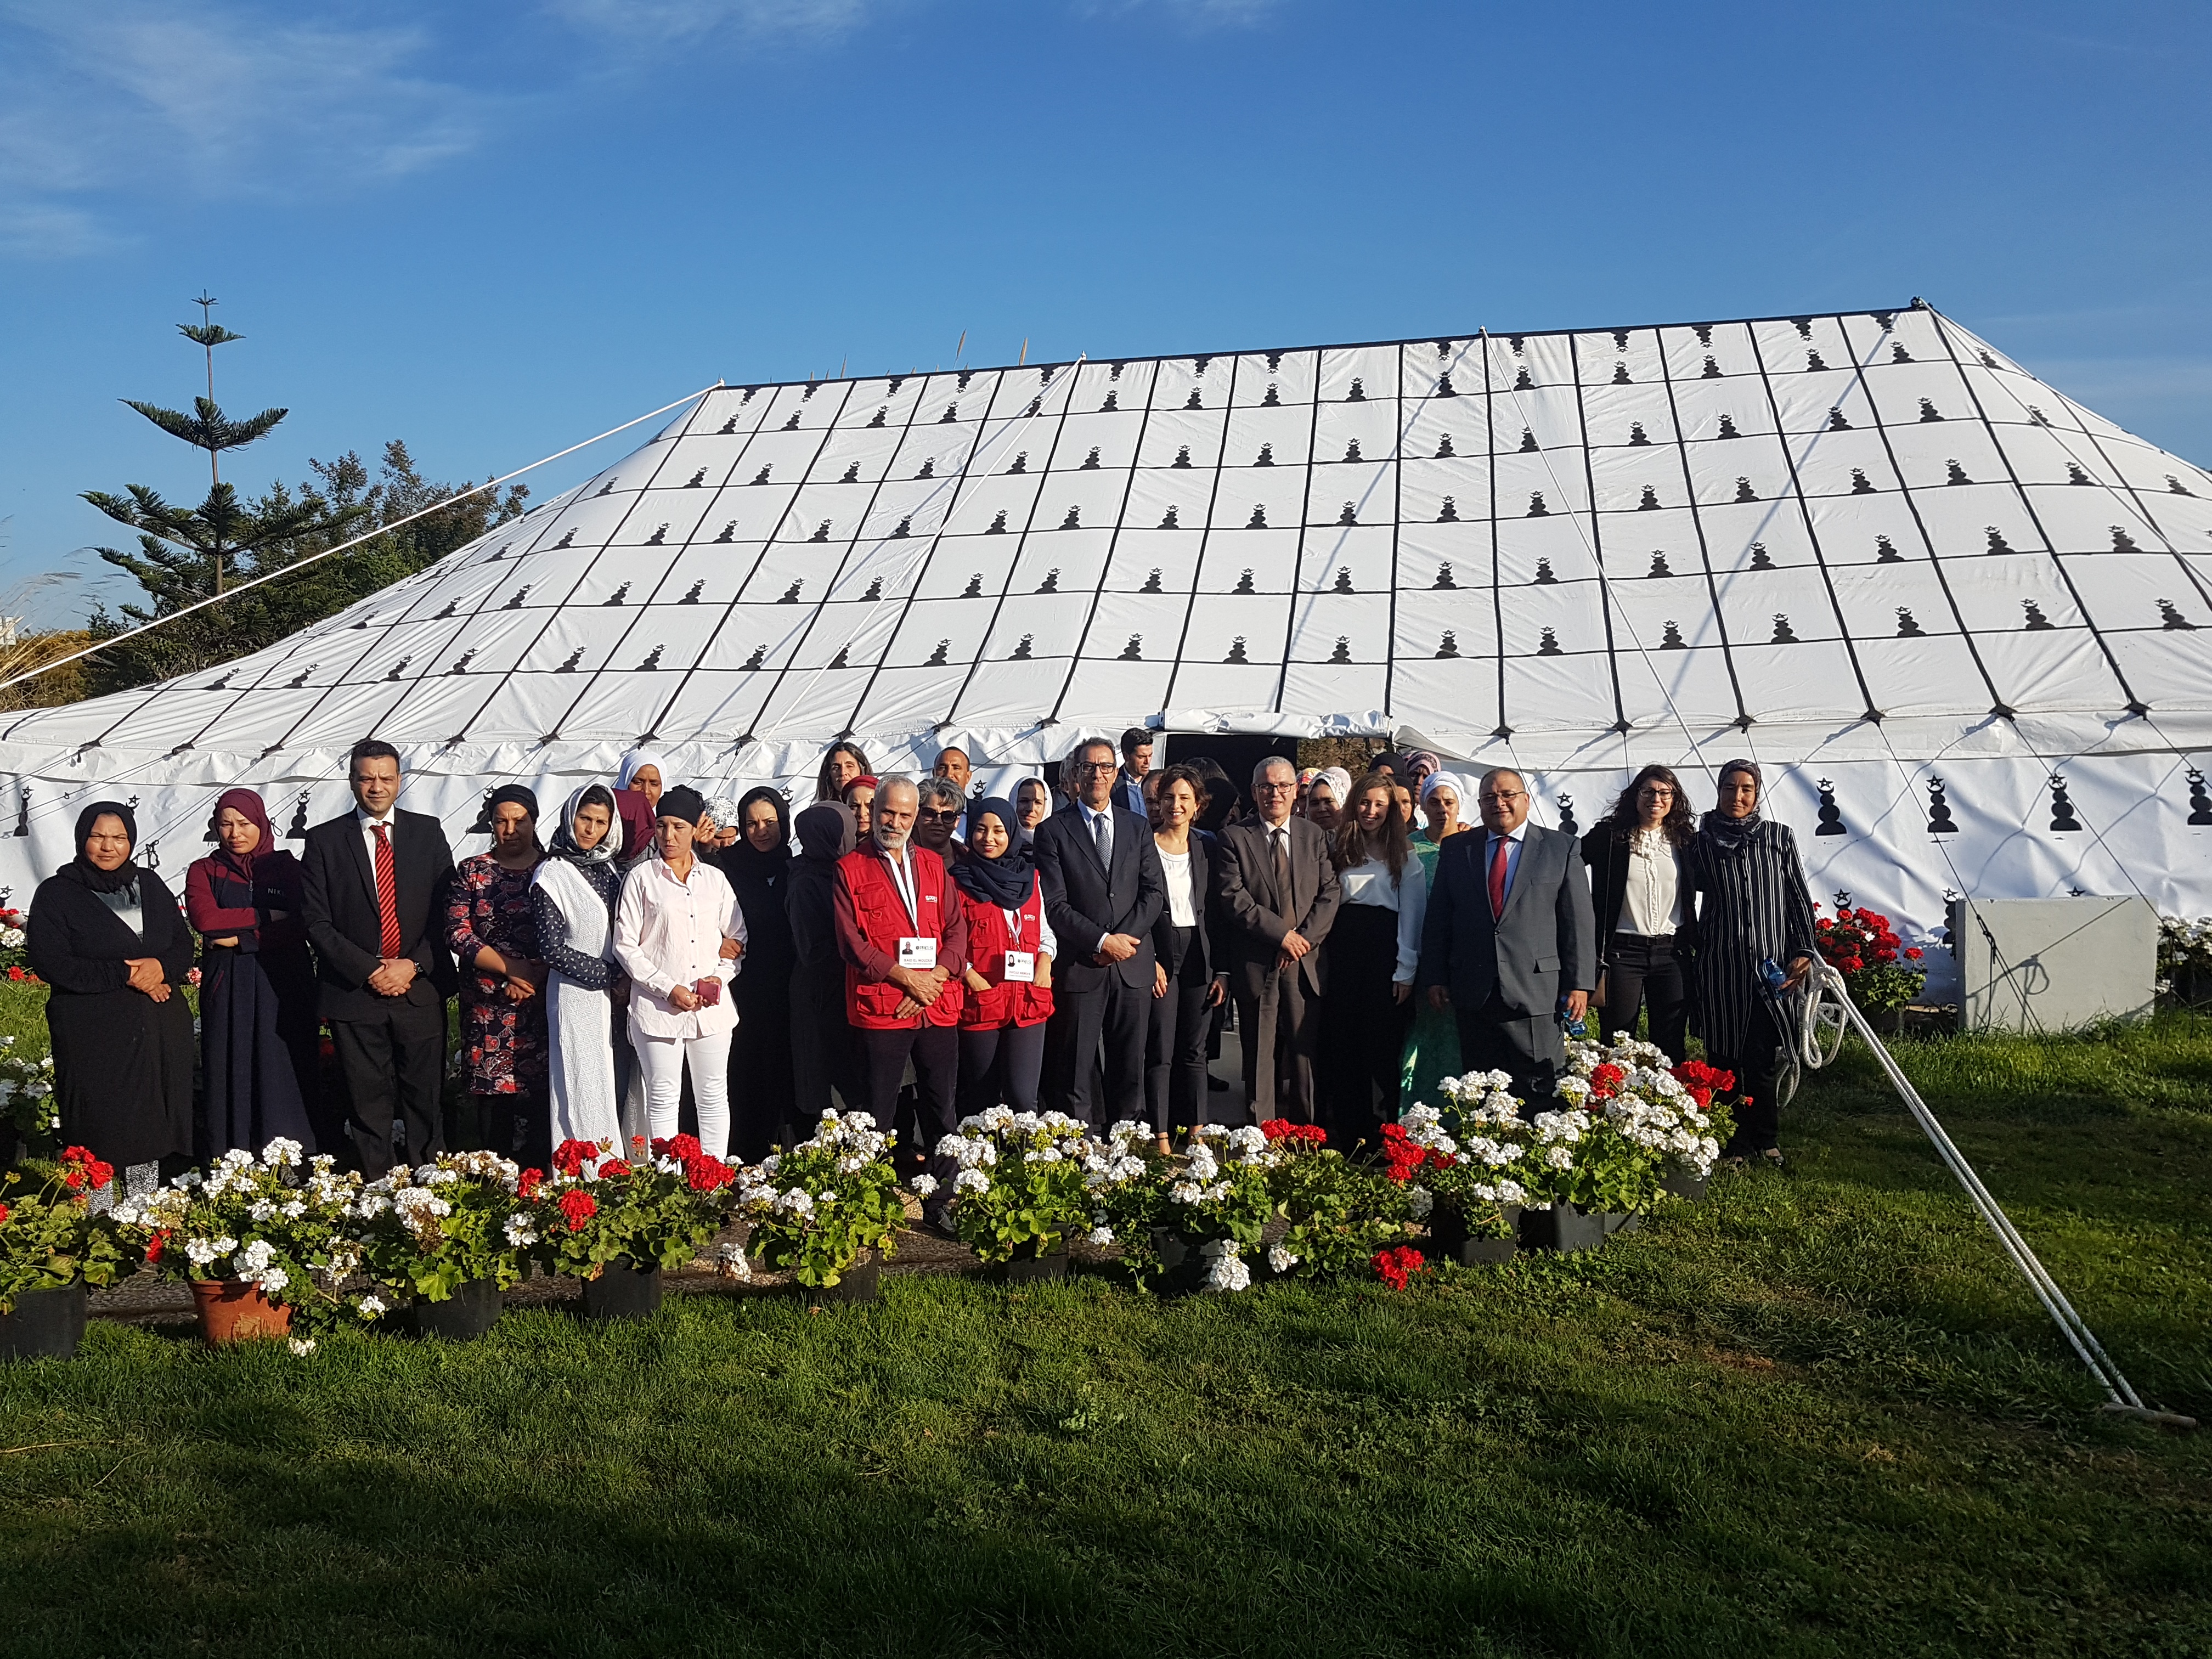 HIGHEST MOROCCAN AUTHORITIES OF MIGRATIONS VISIT AGROMARTIN